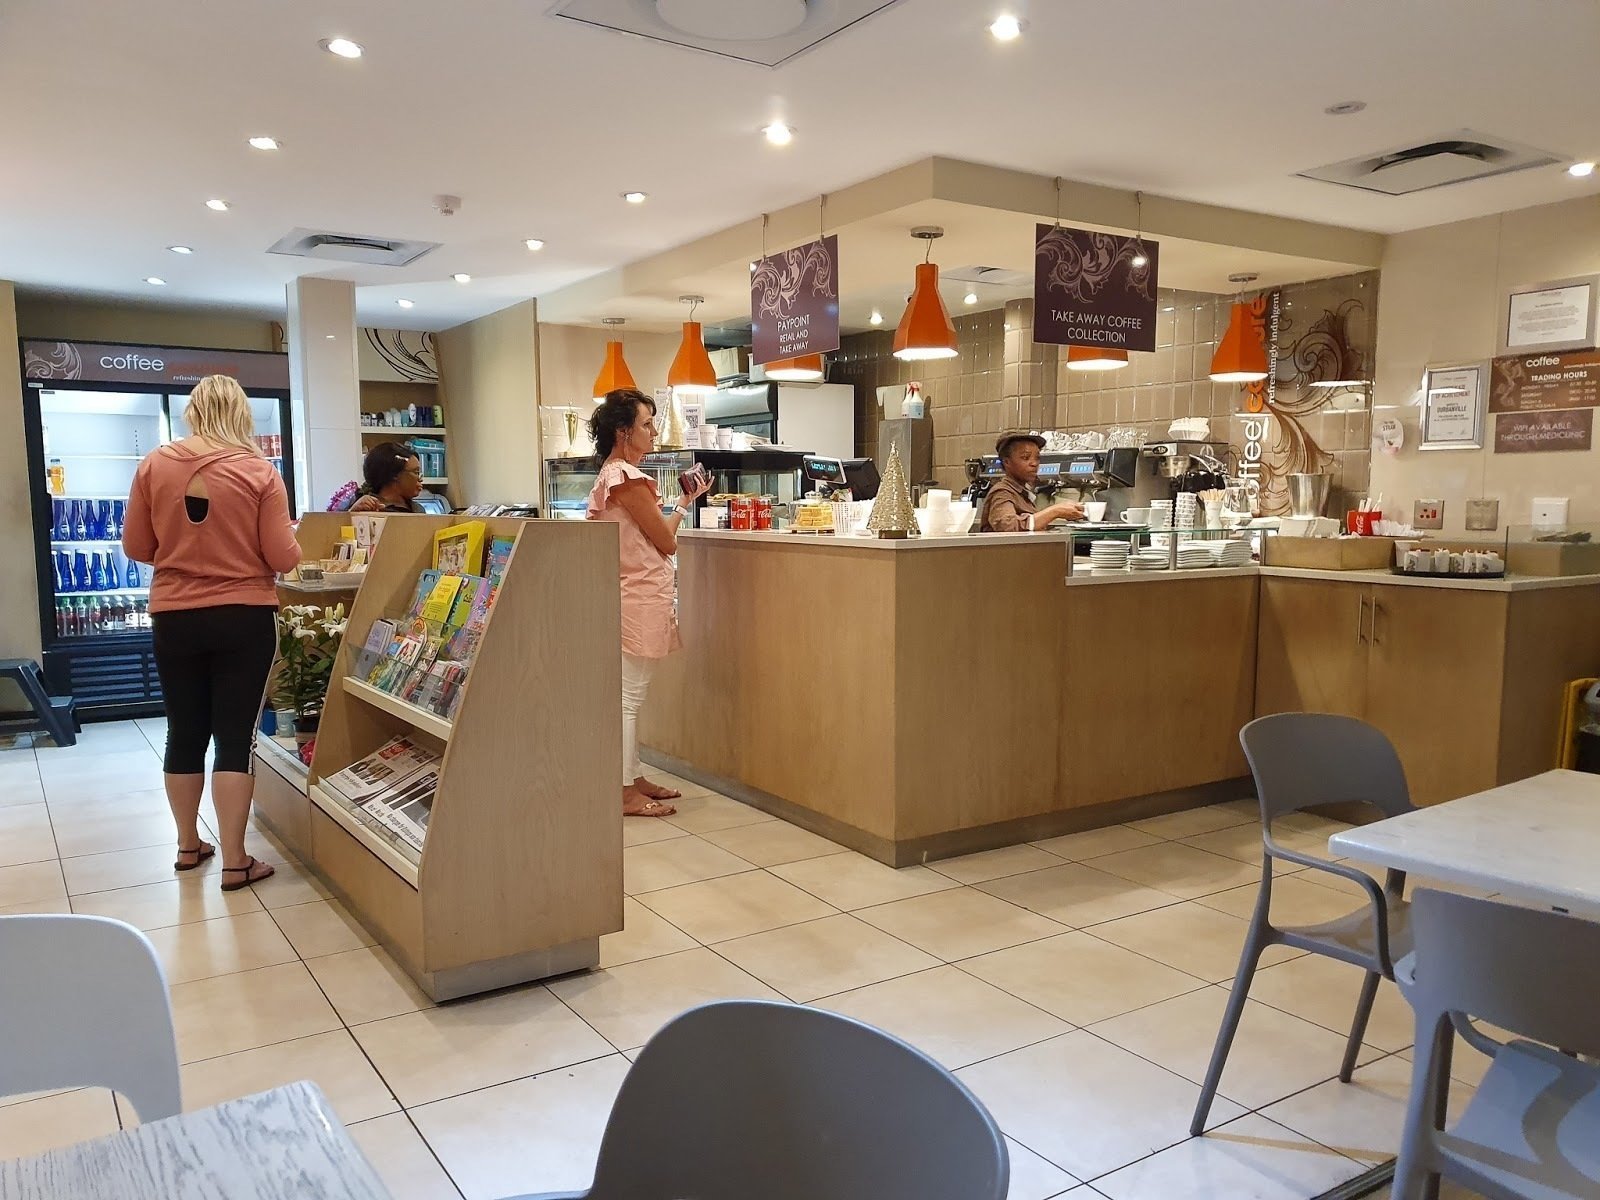 <span class="translation_missing" title="translation missing: en.meta.location_title, location_name: Coffee Couture, city: Cape Town">Location Title</span>